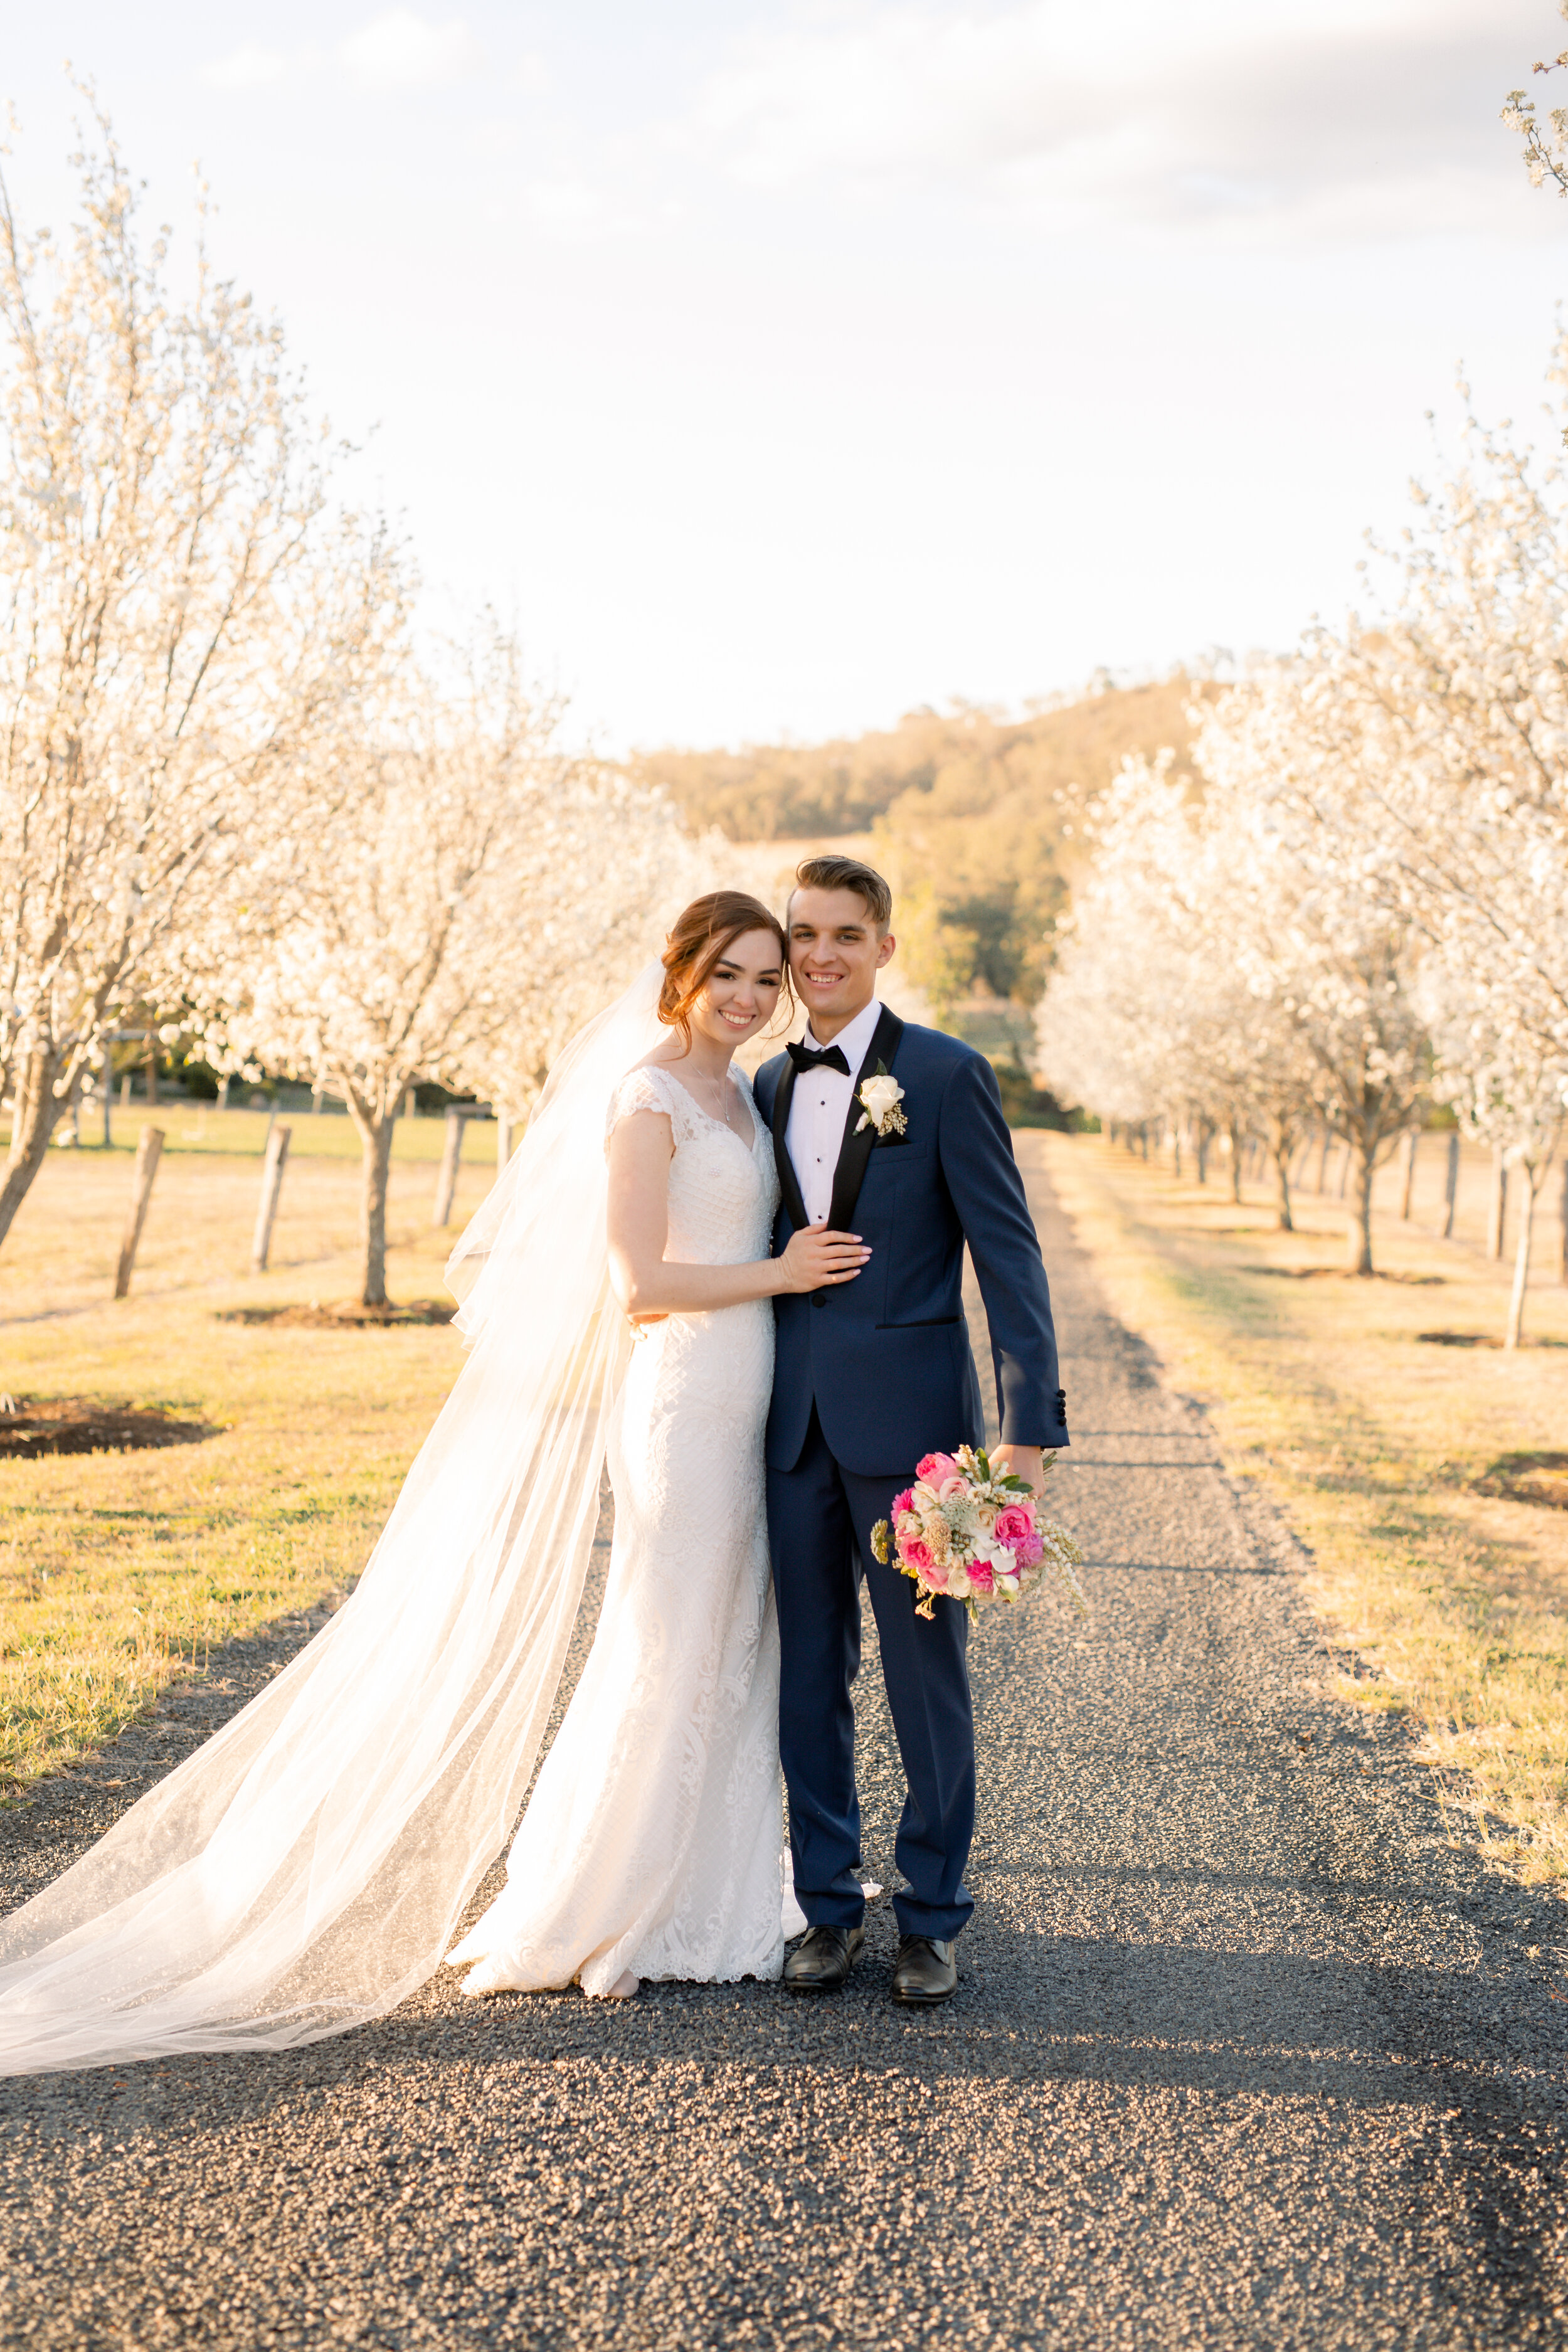 Bride and groom surrounded by white floral blooming trees